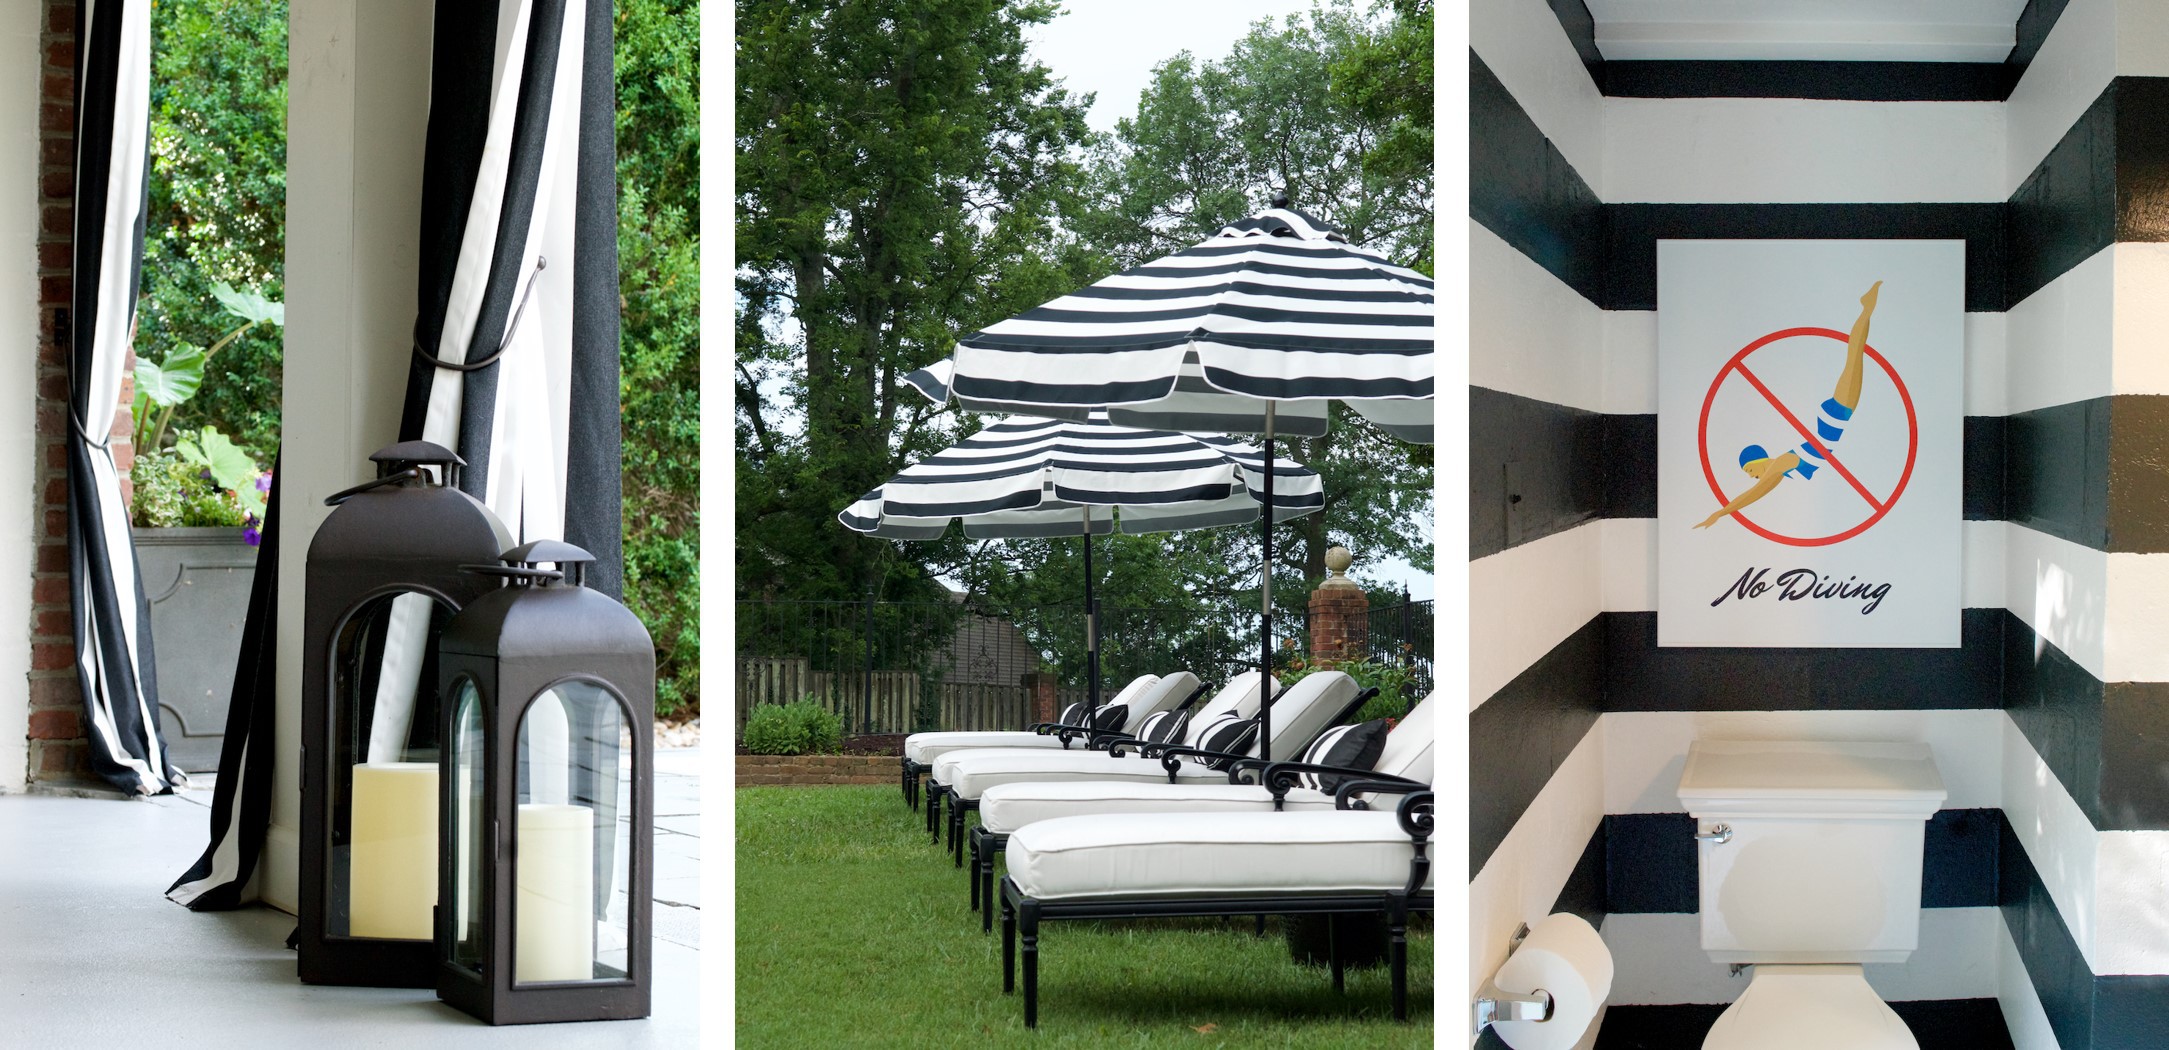 Black and white pool decor. Black and white pool chairs. Black and white striped pool bathroom.